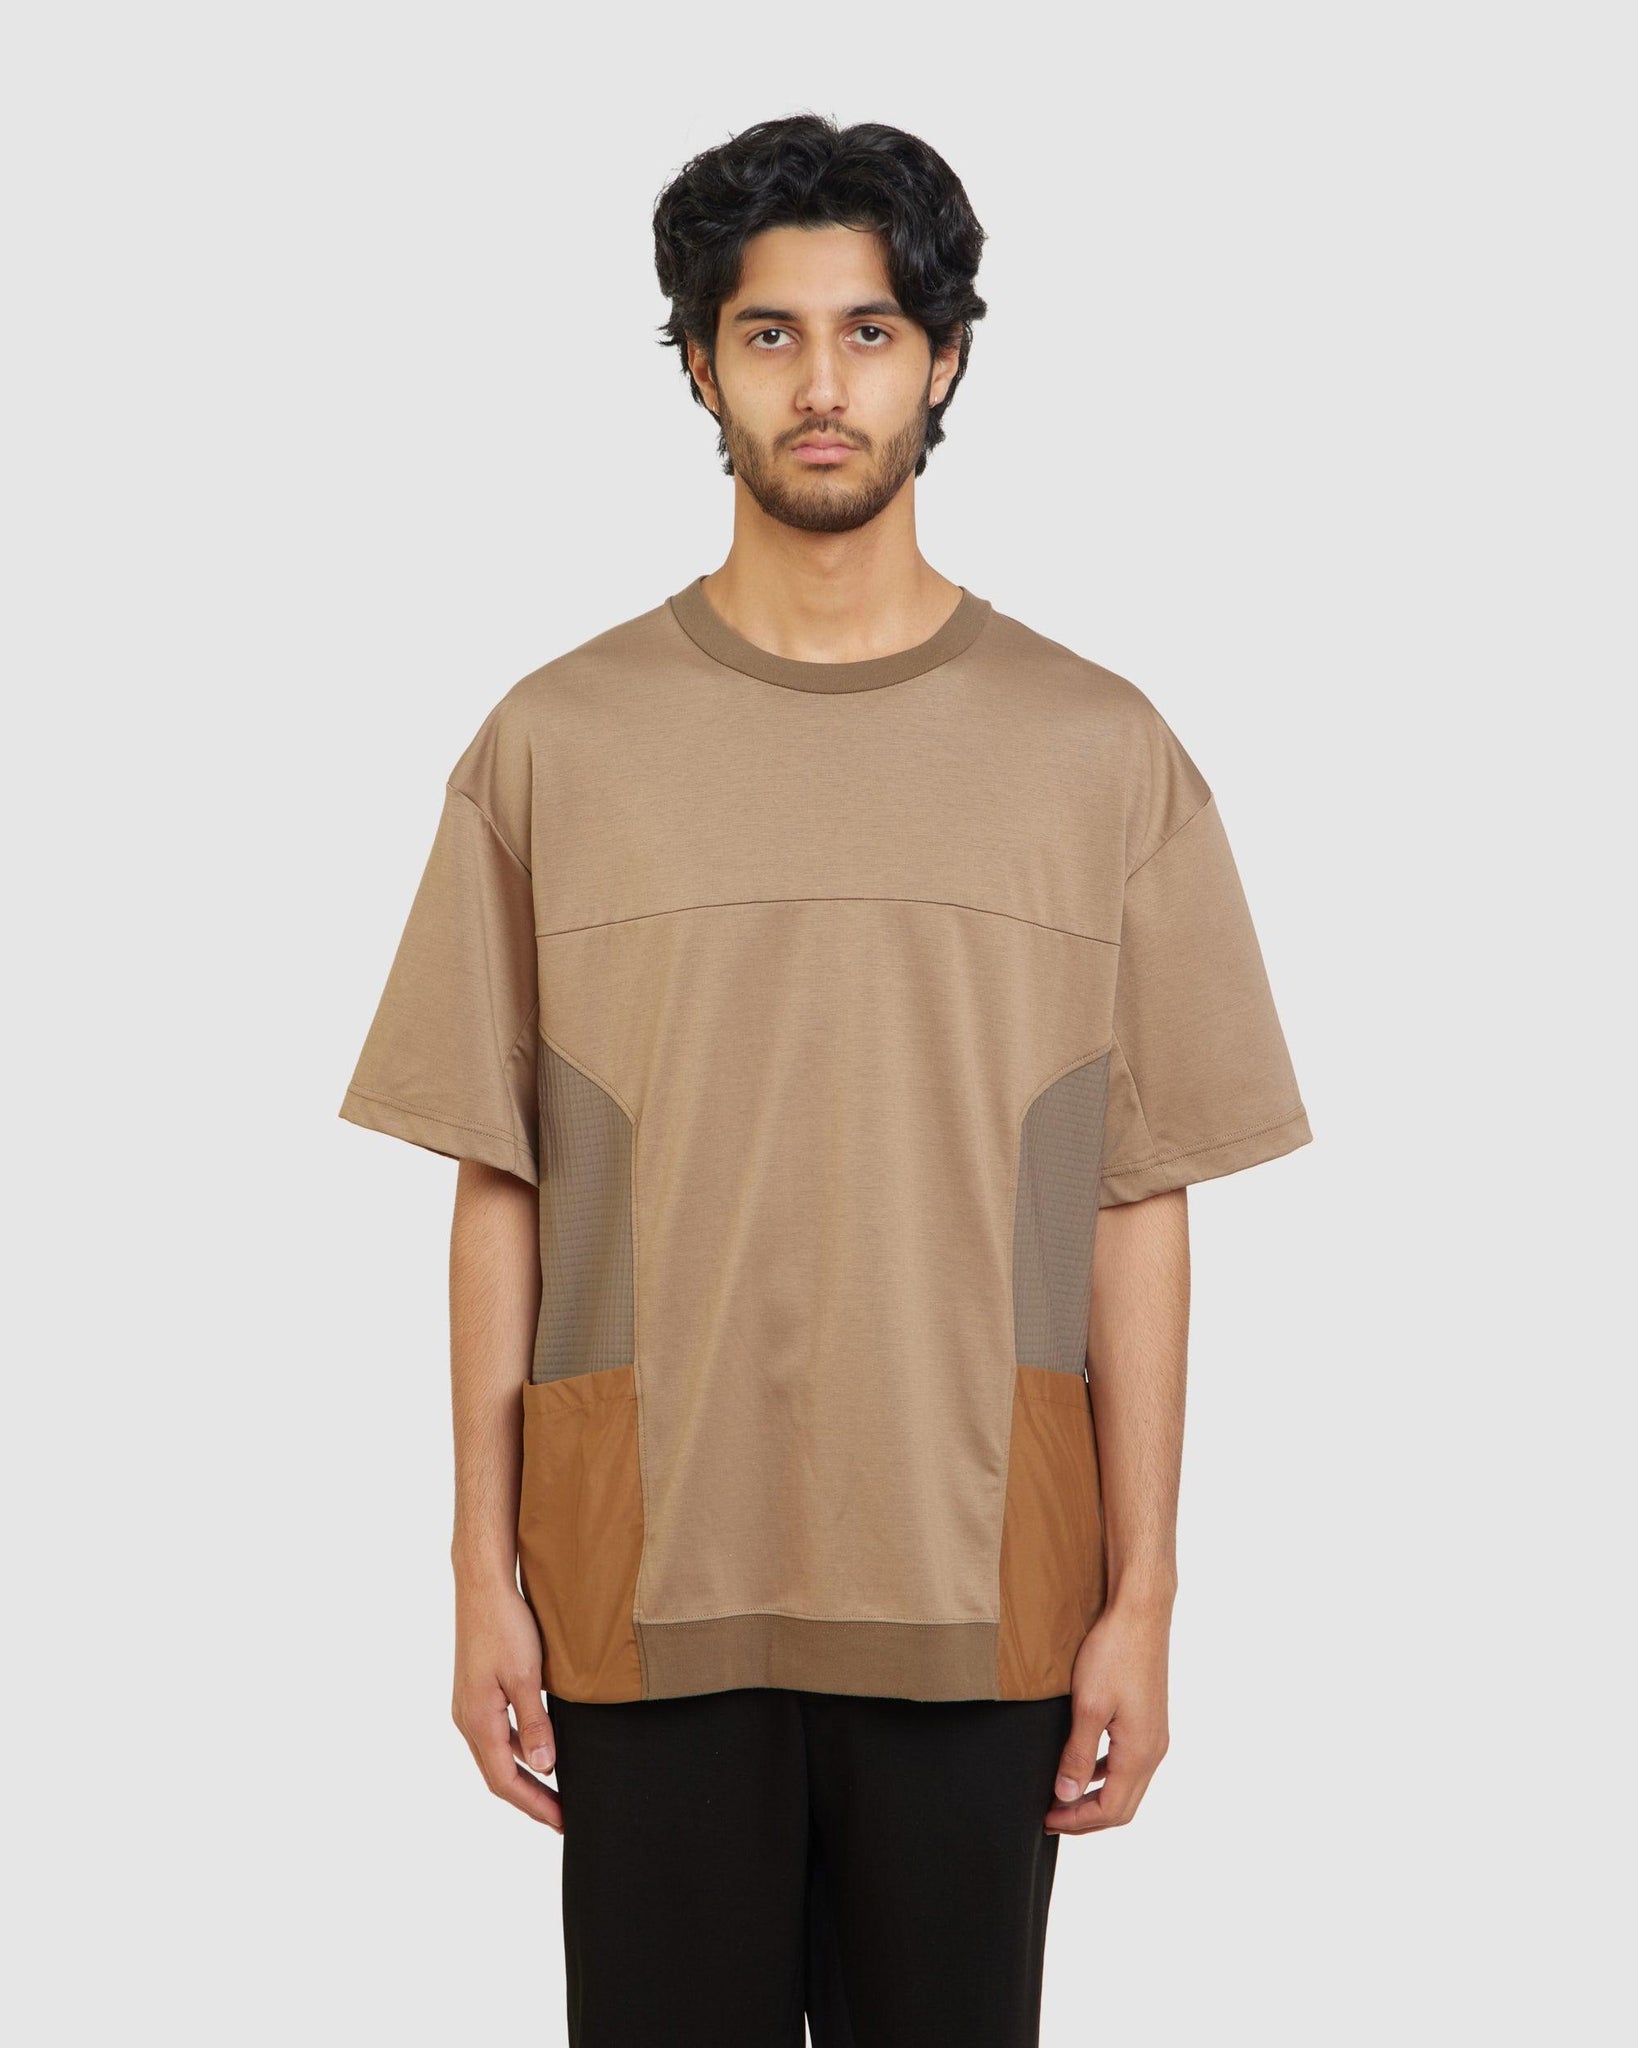 Double Knit Pocket T-Shirt - {{ collection.title }} - Chinatown Country Club 